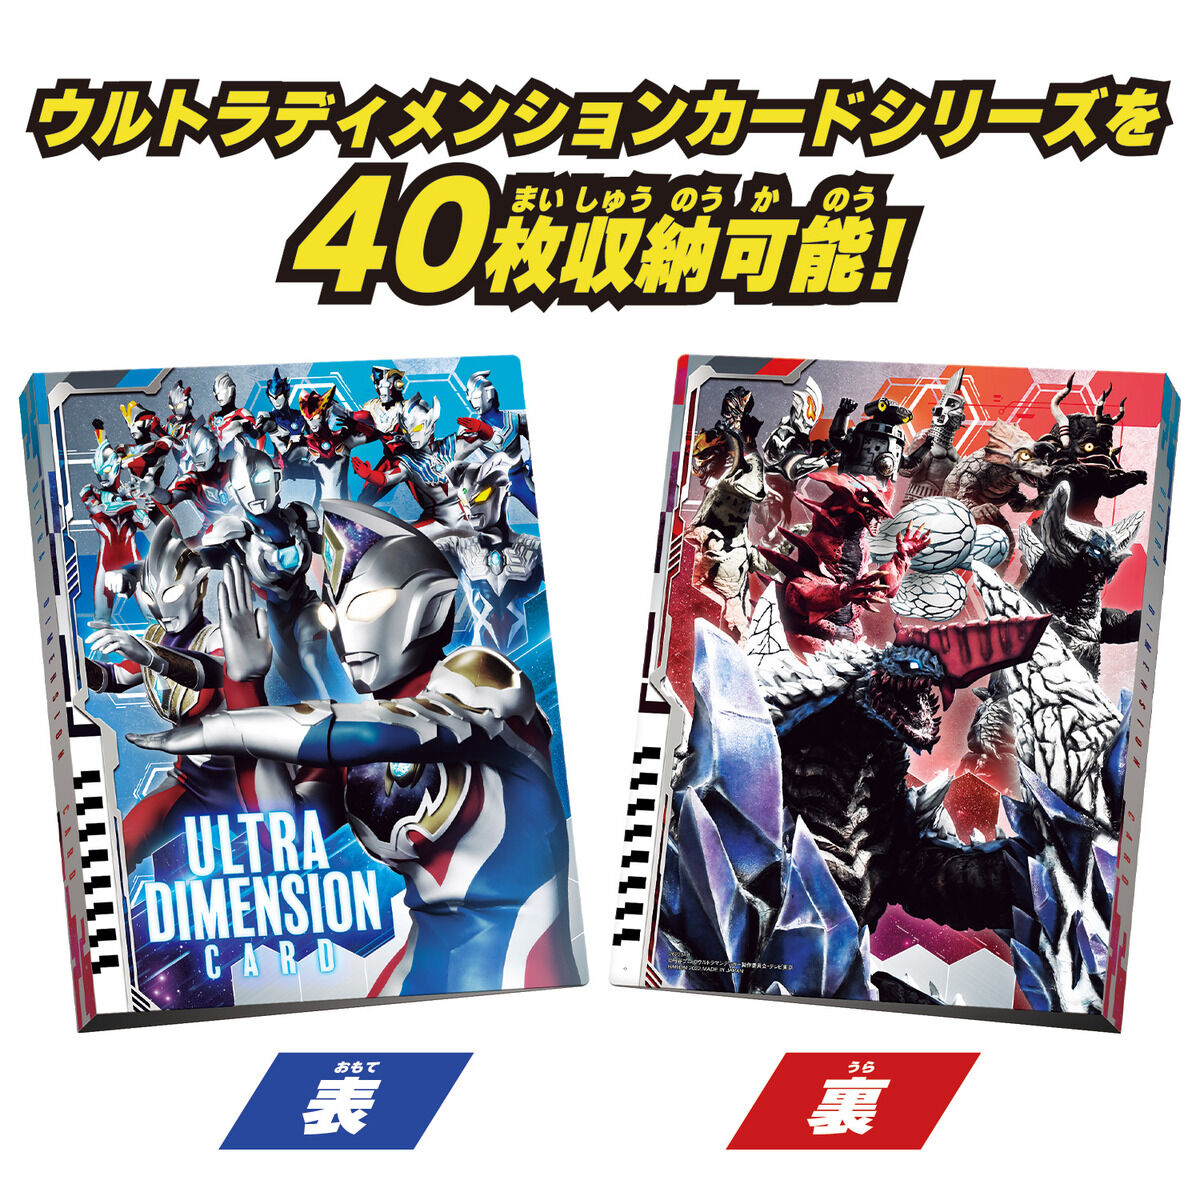 Ultra Dimension Card Official Binder